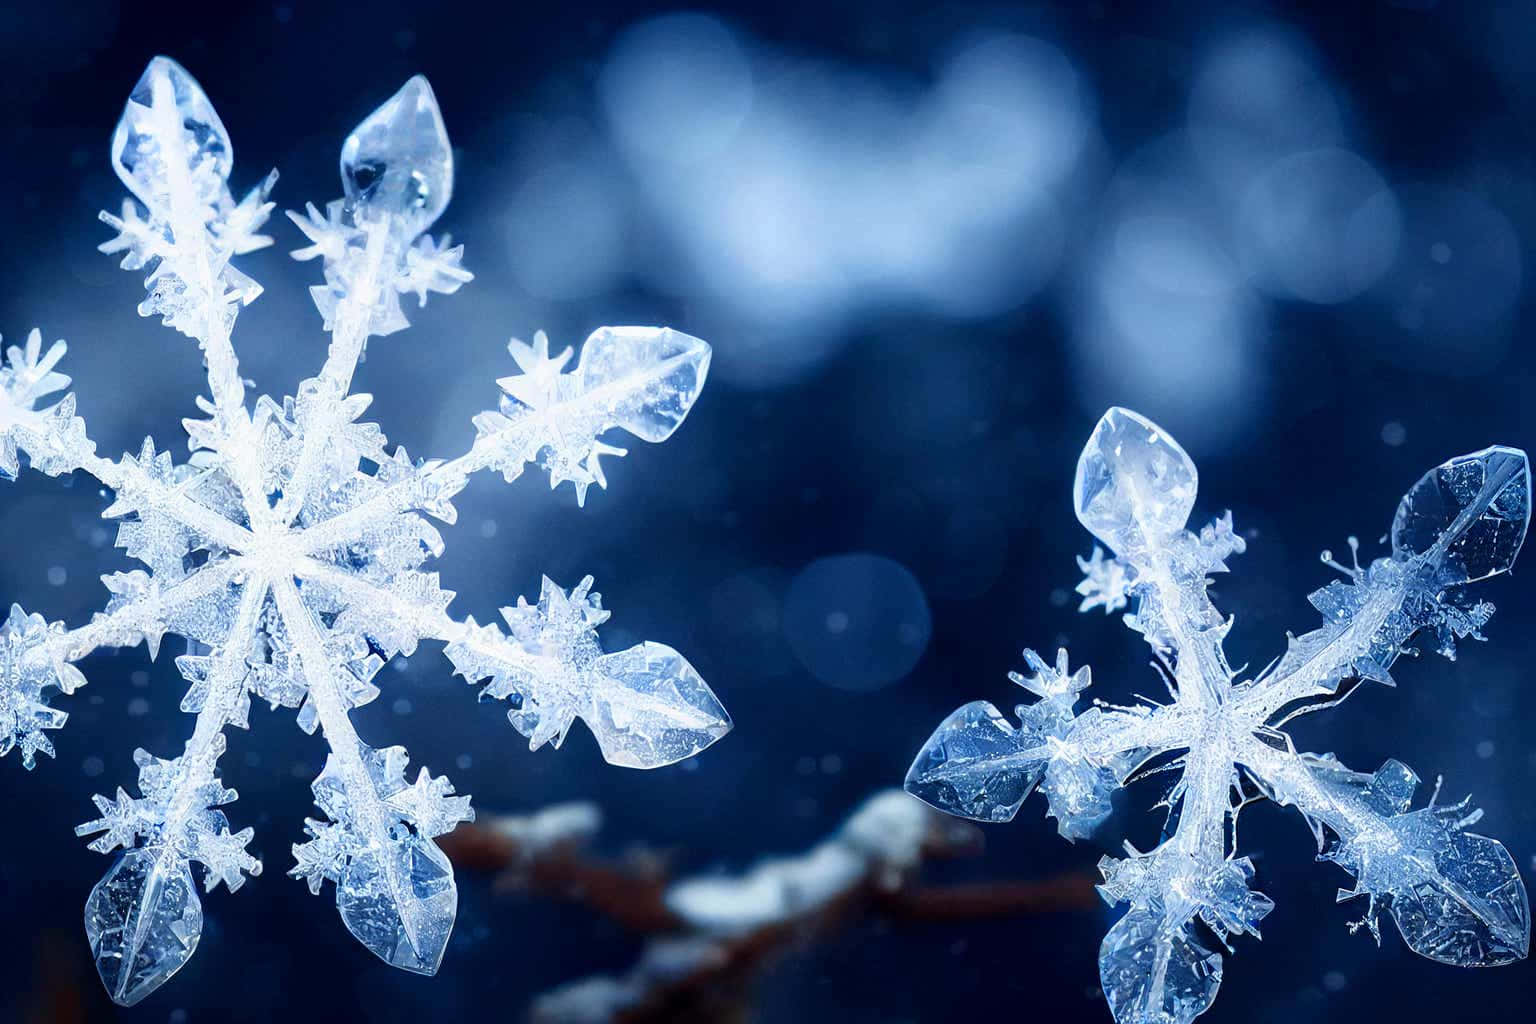 "Look how intricate and delicate a snowflake looks when you zoom in close."